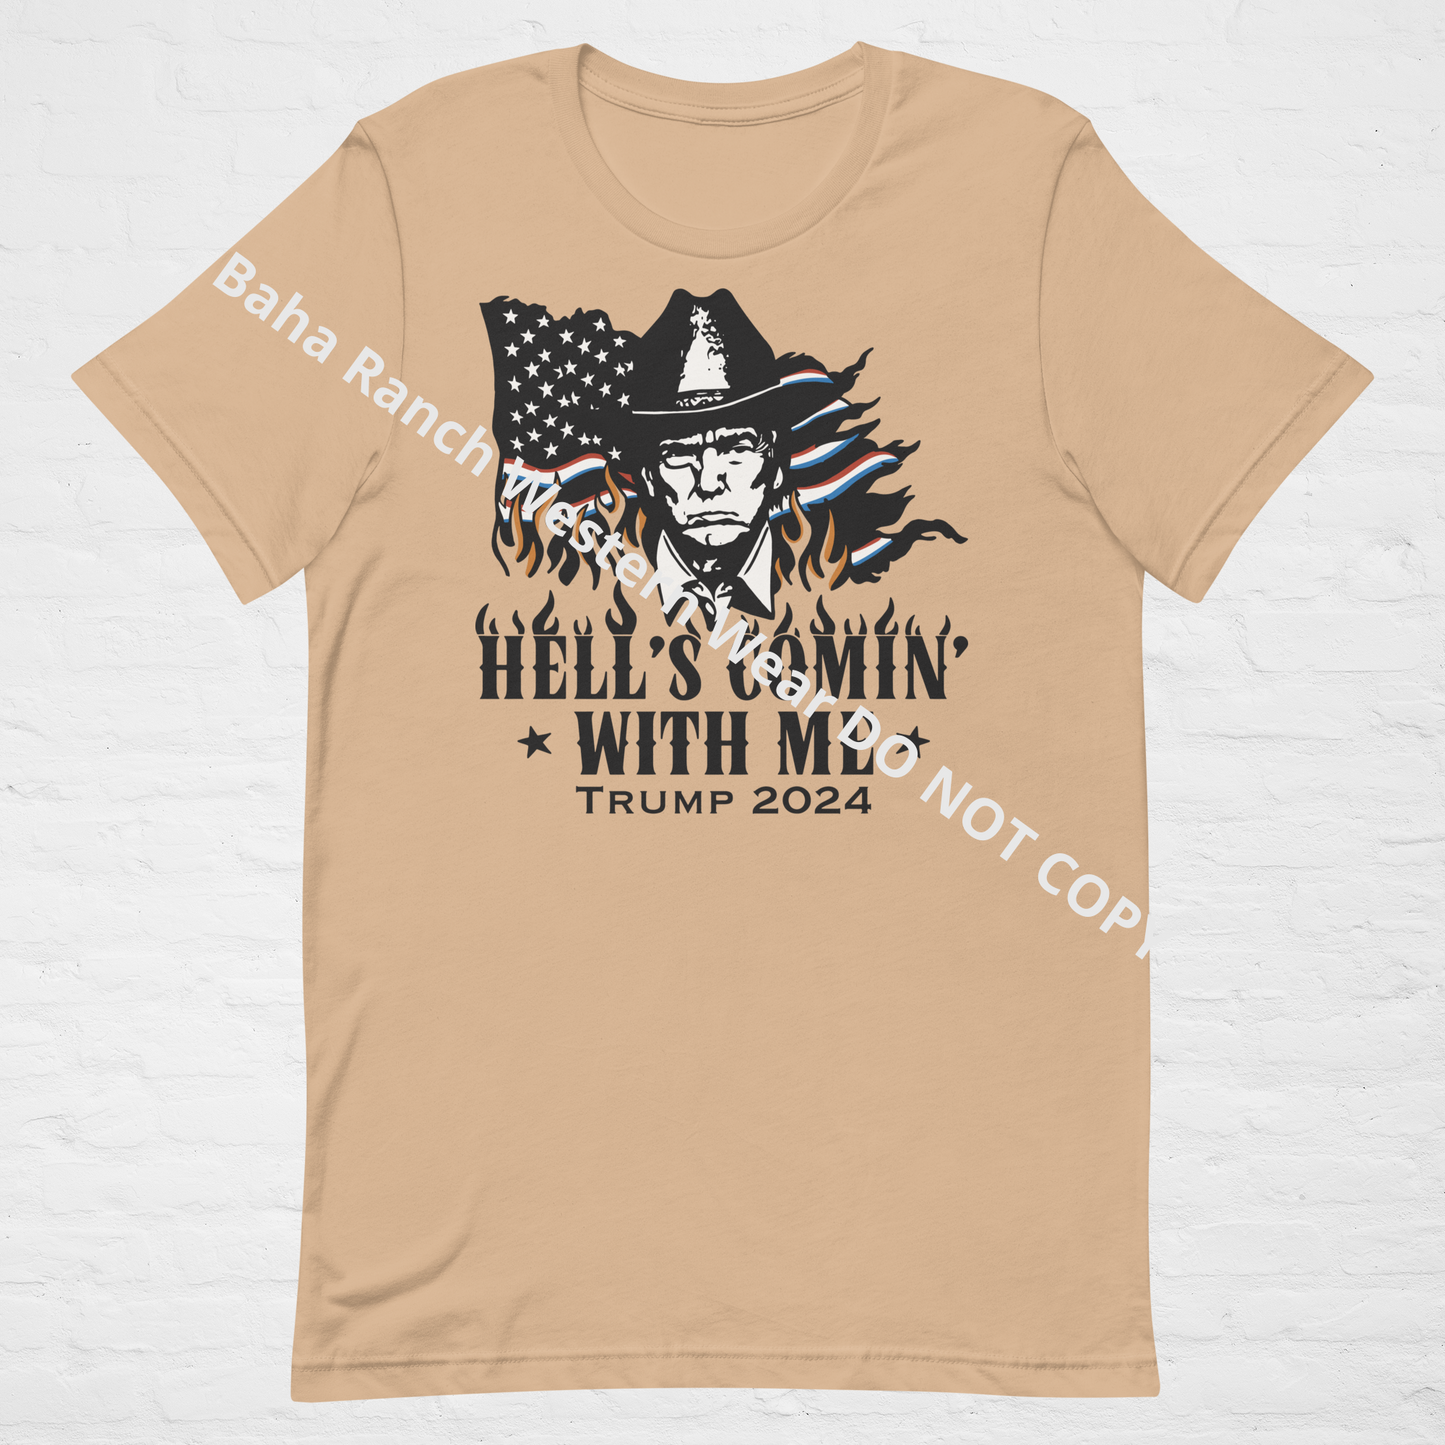 Hells Comin' With Me Unisex t-shirt